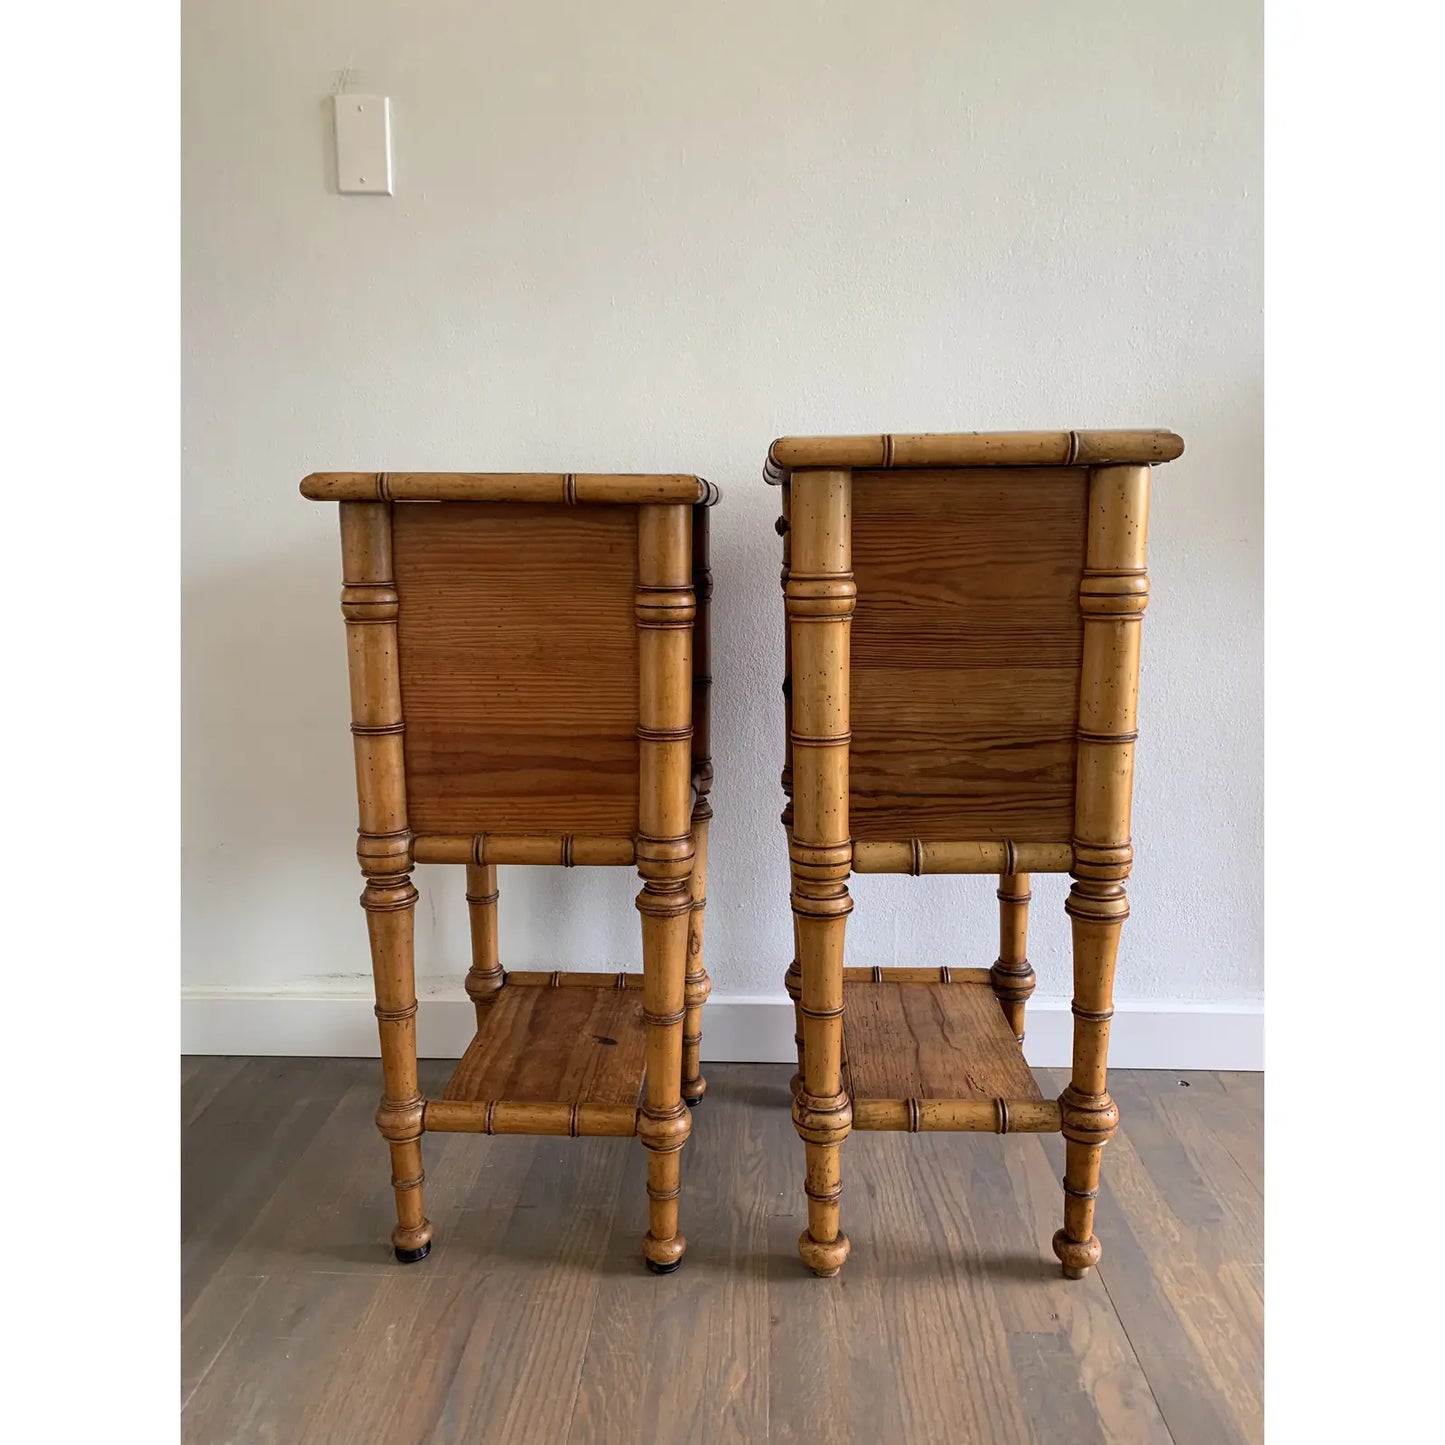 Early 20th Century French Colonial Fir and Marble Safari Style Side Tables - Set of 2